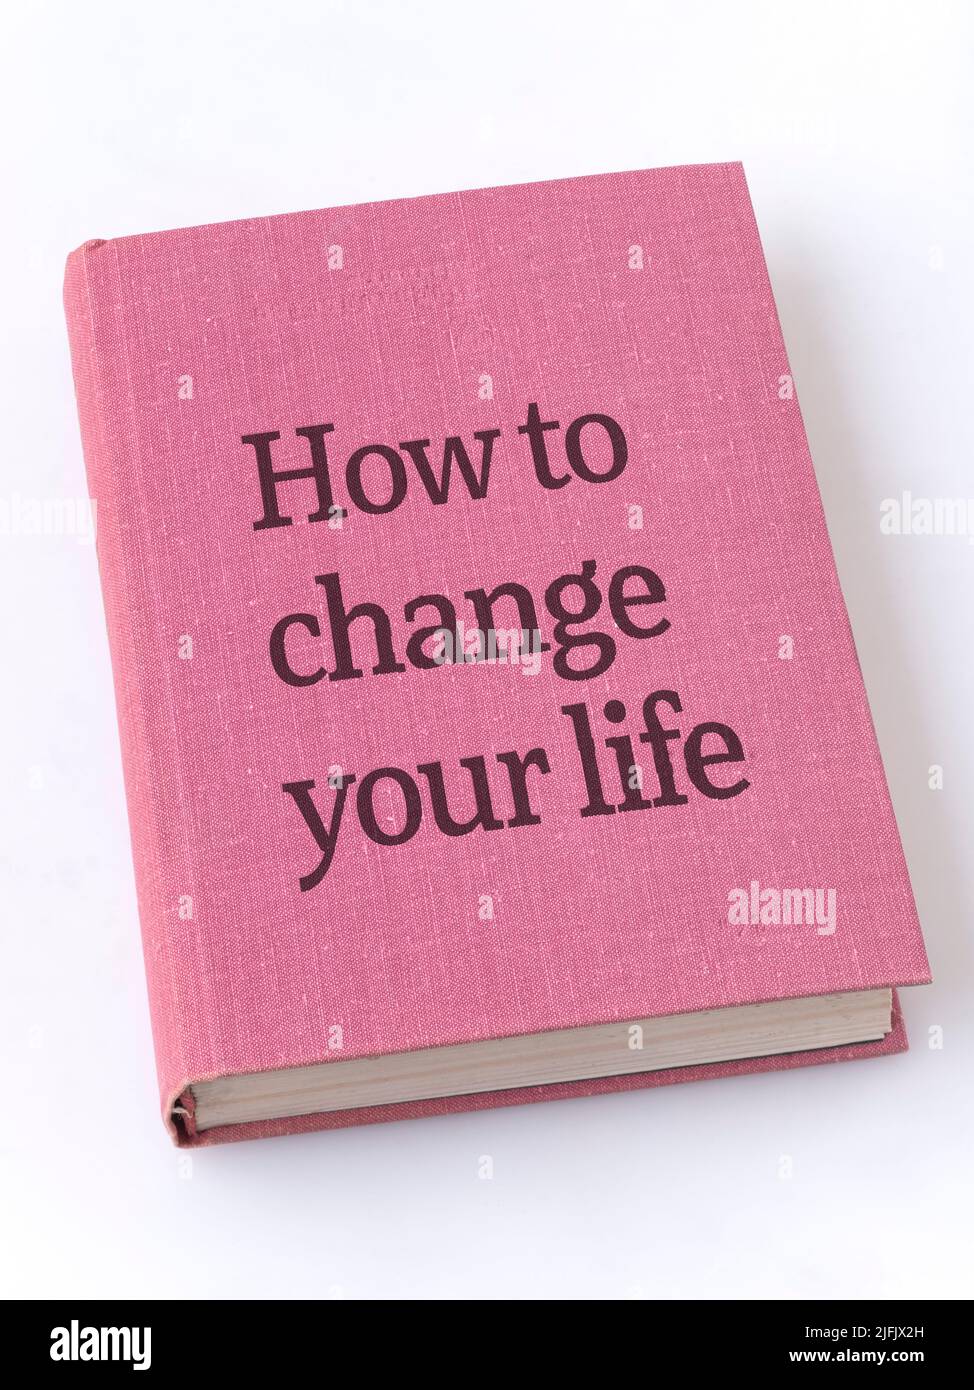 how to change your life phrase printed on textile book cover Stock Photo